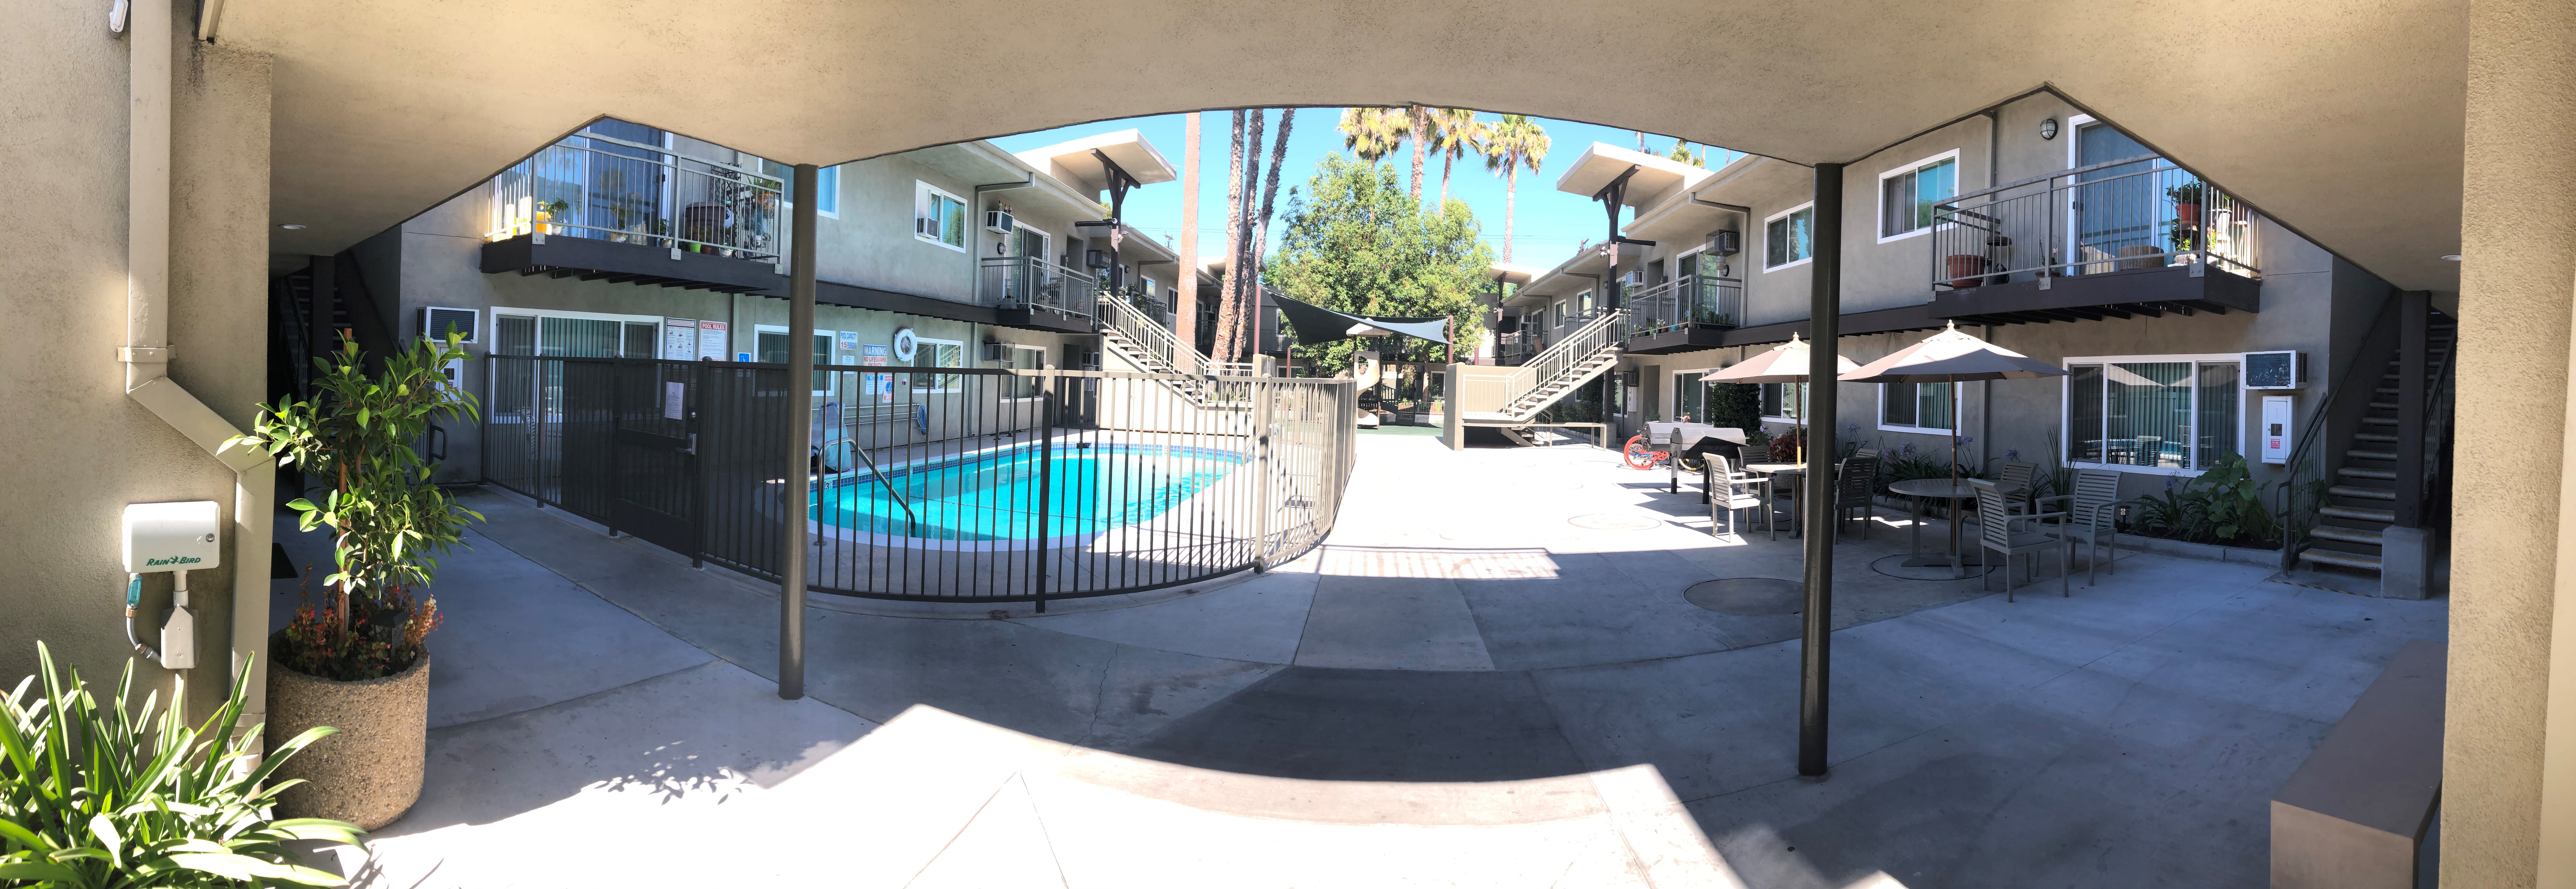 View of a gated pool, on the right side tables with chairs and umbrellas, building units around the pool.